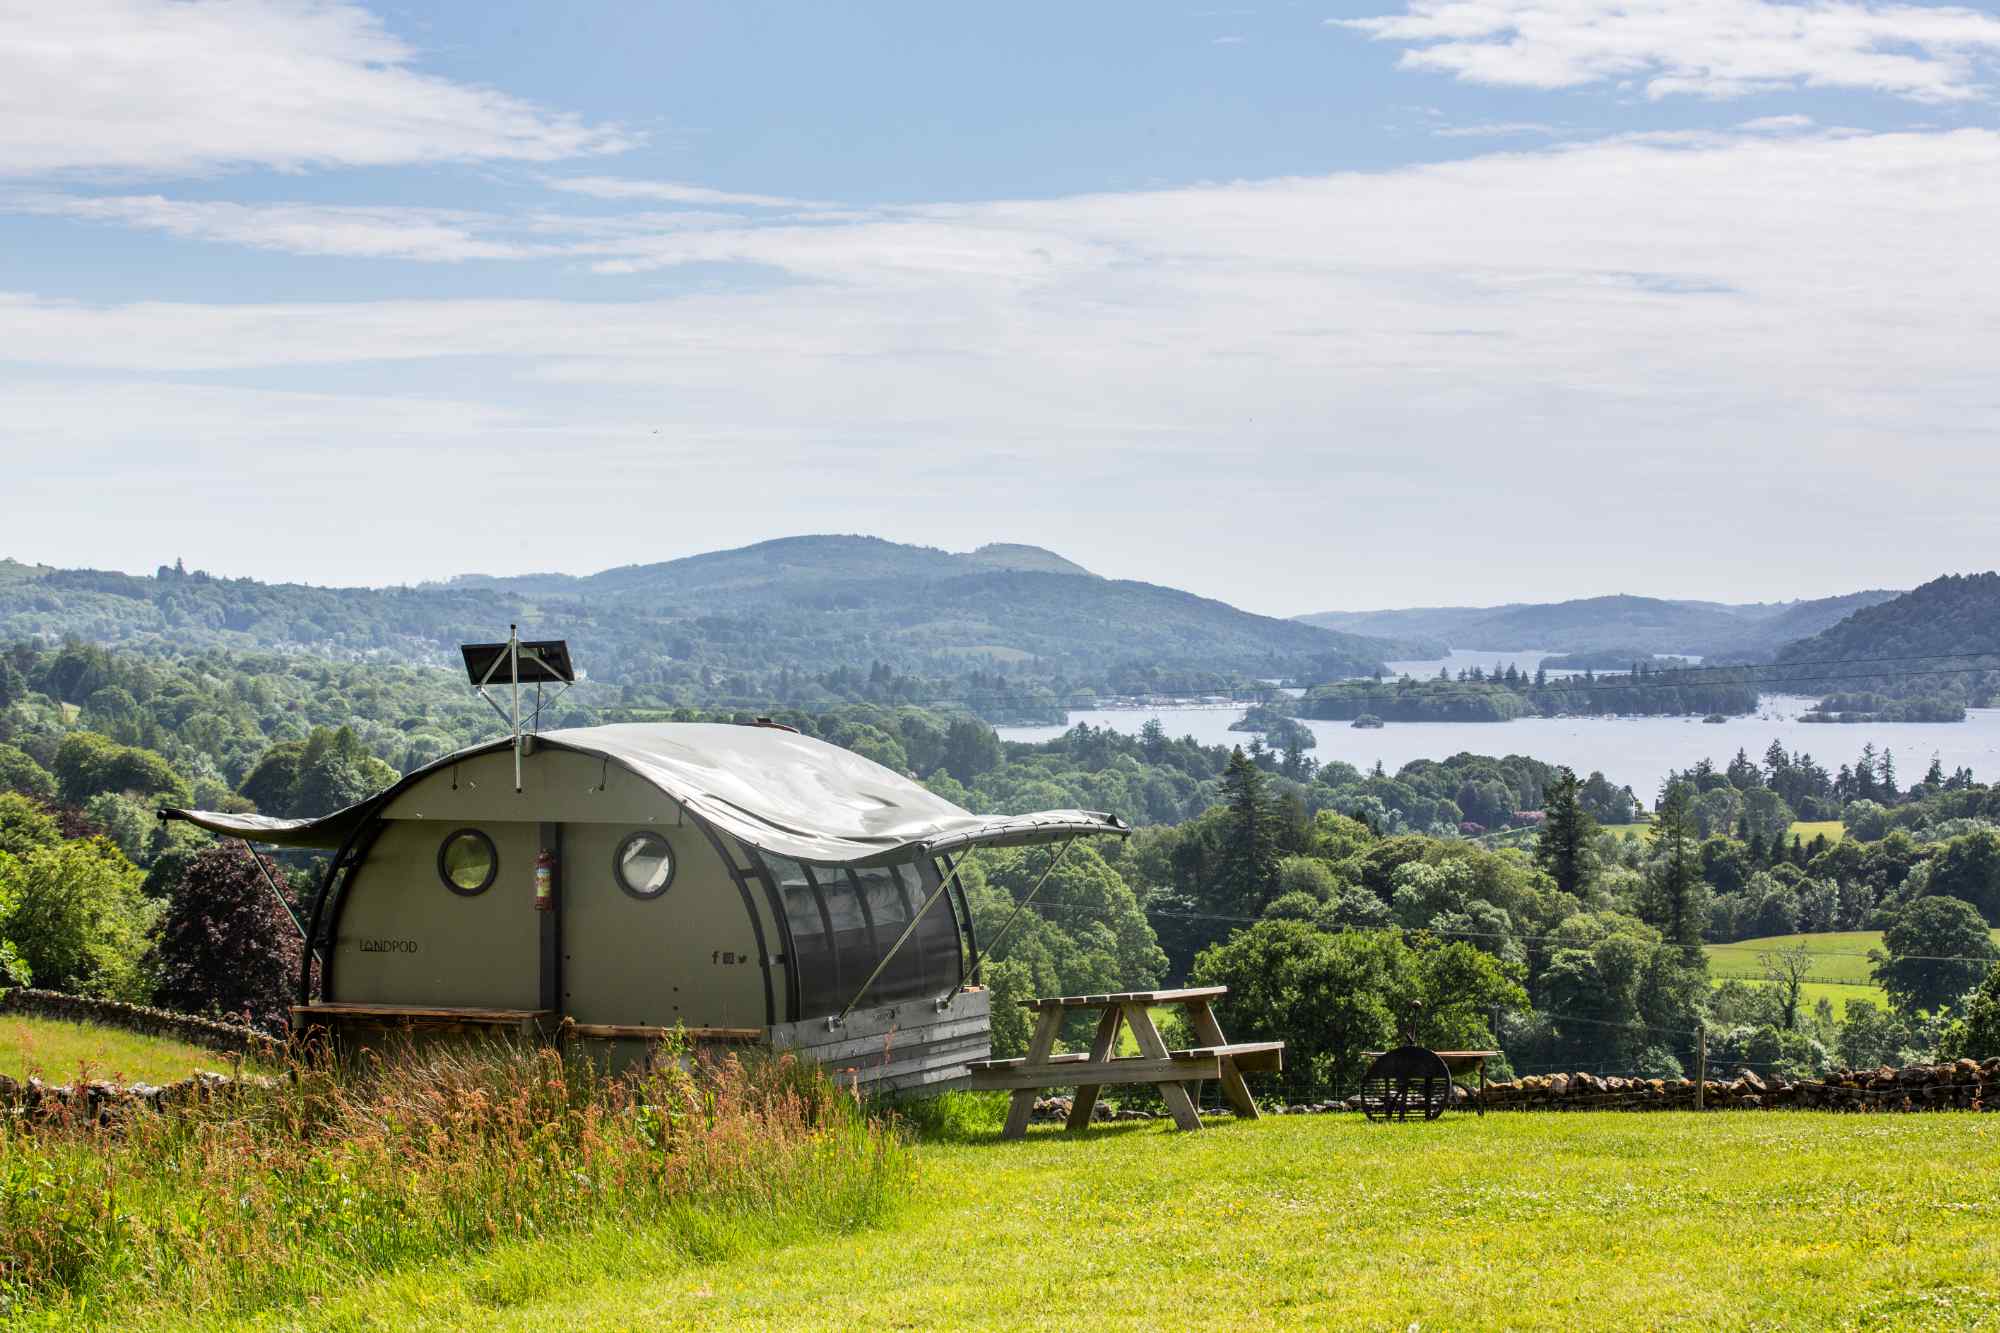 Landpod at YHA Windermere in the Lake District